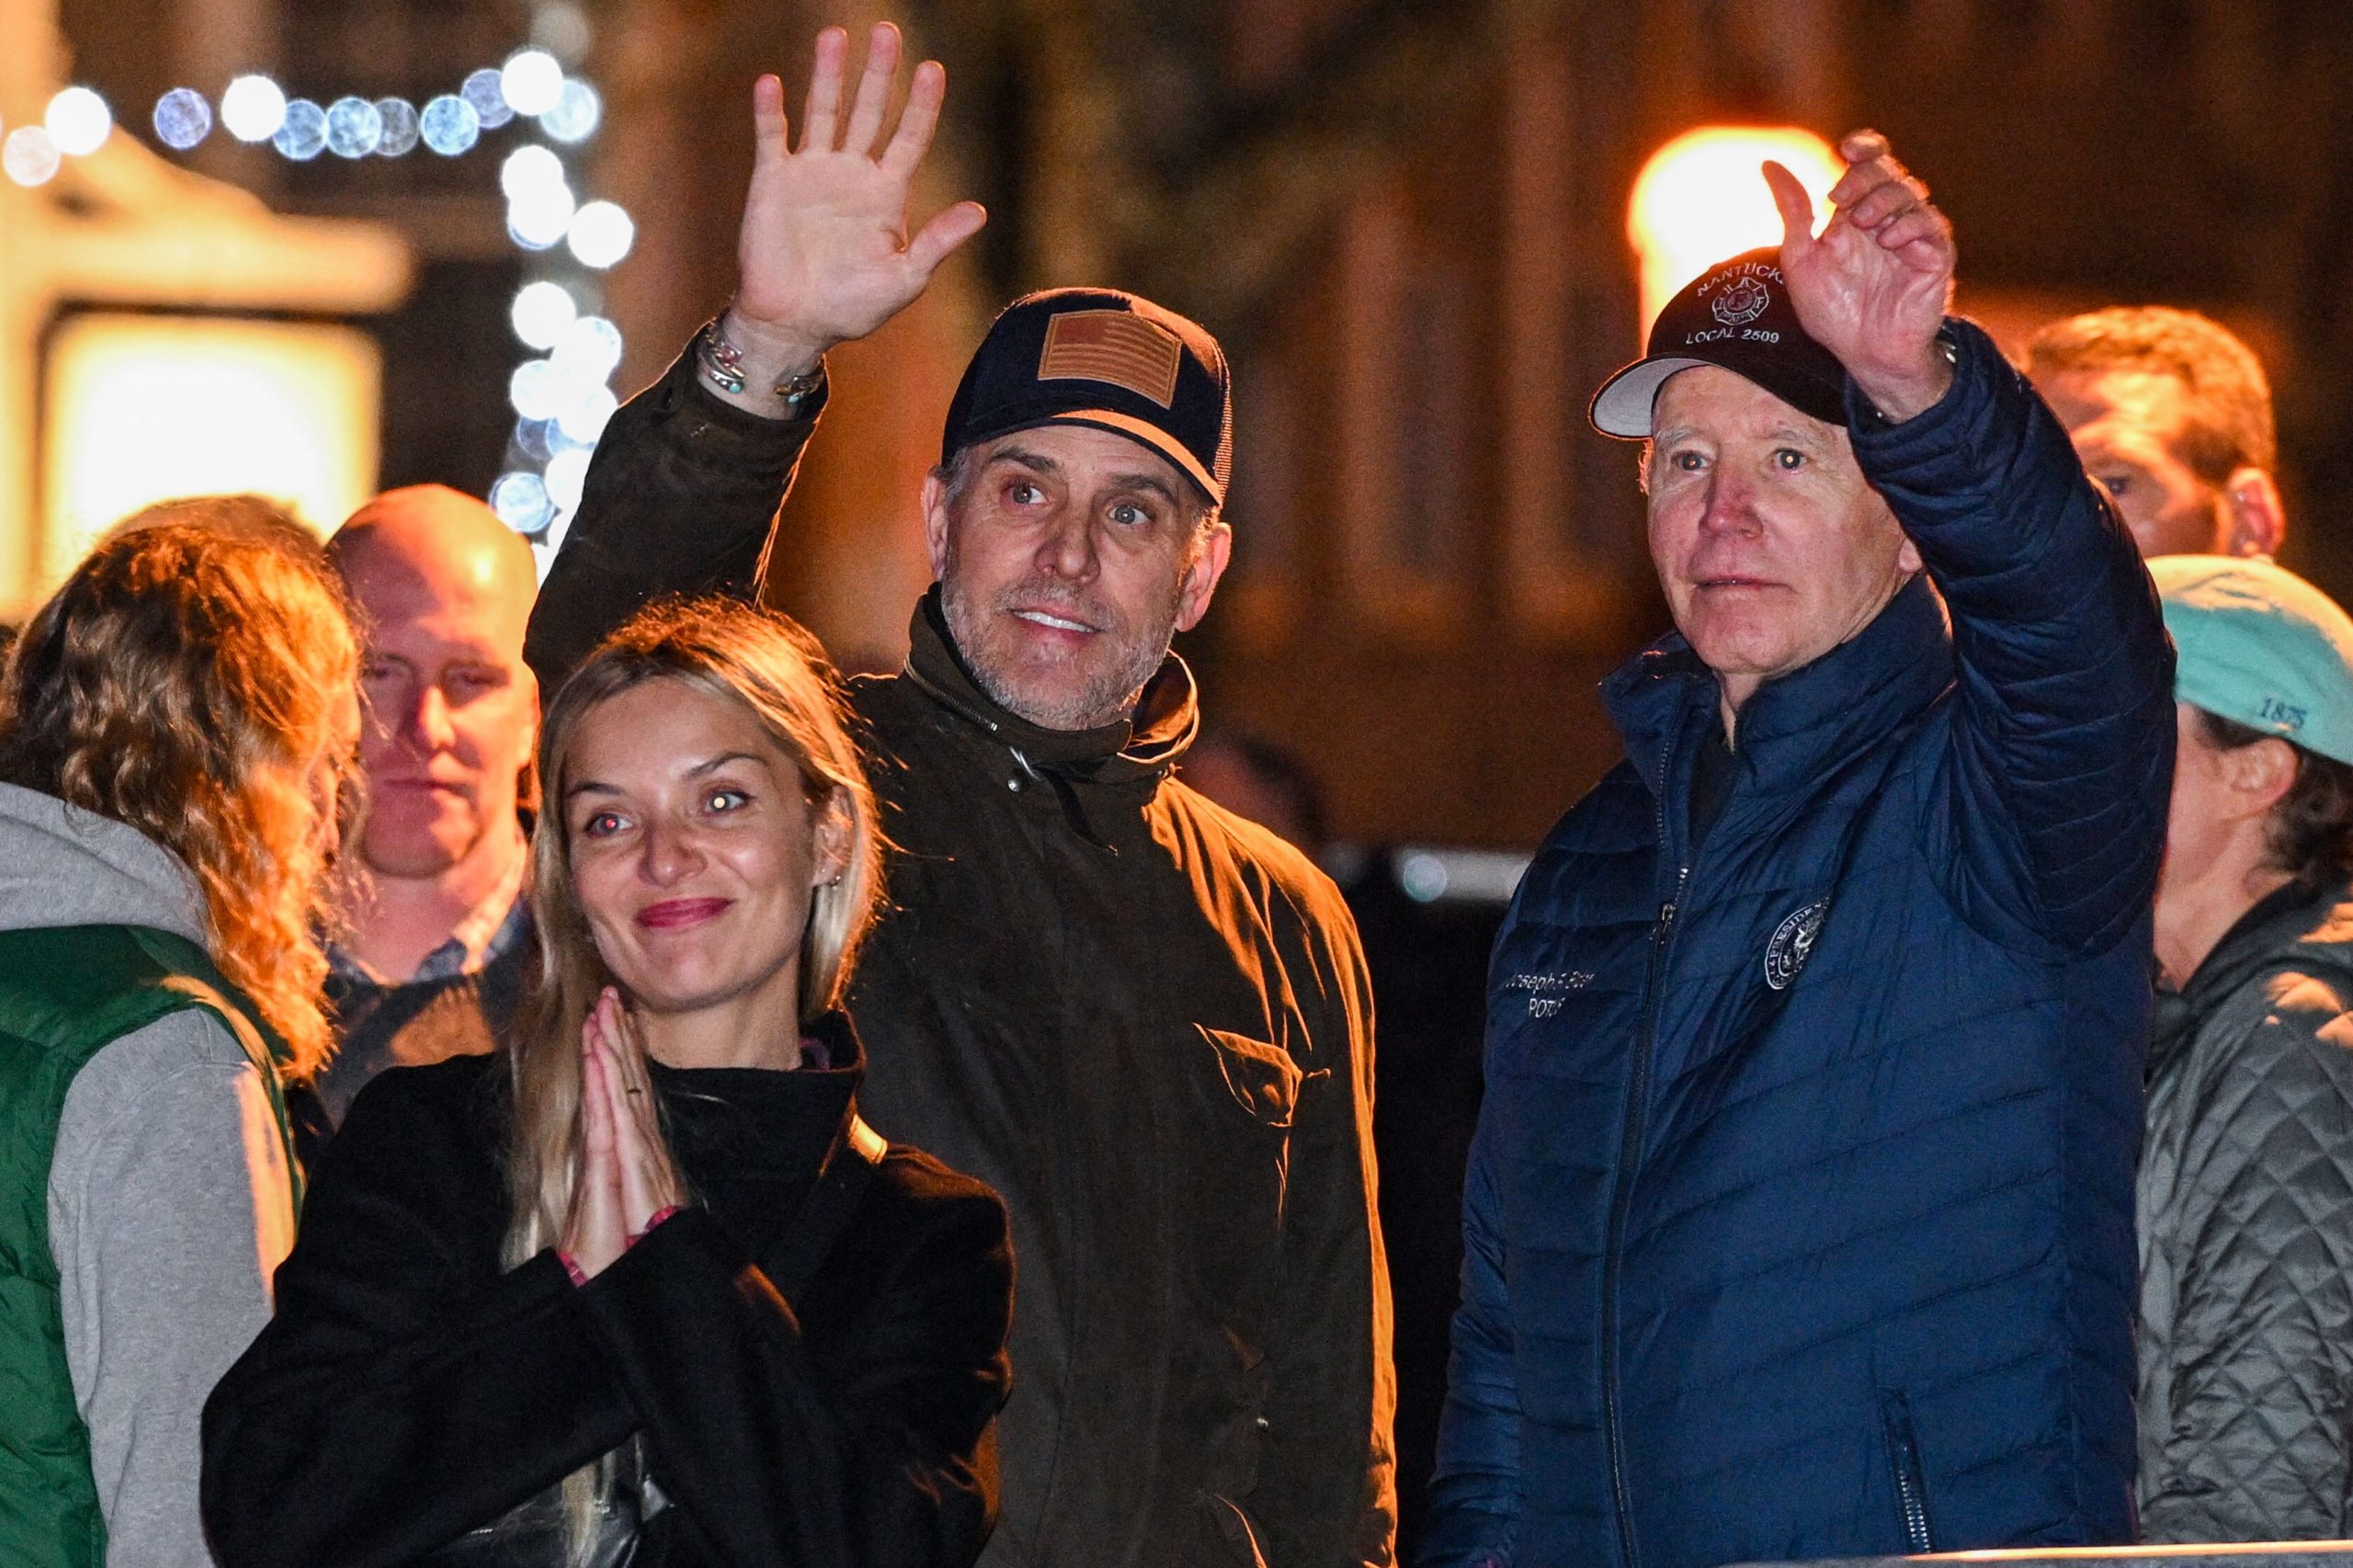 US President Joe Biden waves with his son Hunter Biden and his wife Melissa Cohen during a Christmas tree lighting ceremony in Nantucket, Massachusetts, on November 25, 2022. (Photo by Mandel NGAN / AFP) (Photo by MANDEL NGAN/AFP via Getty Images)